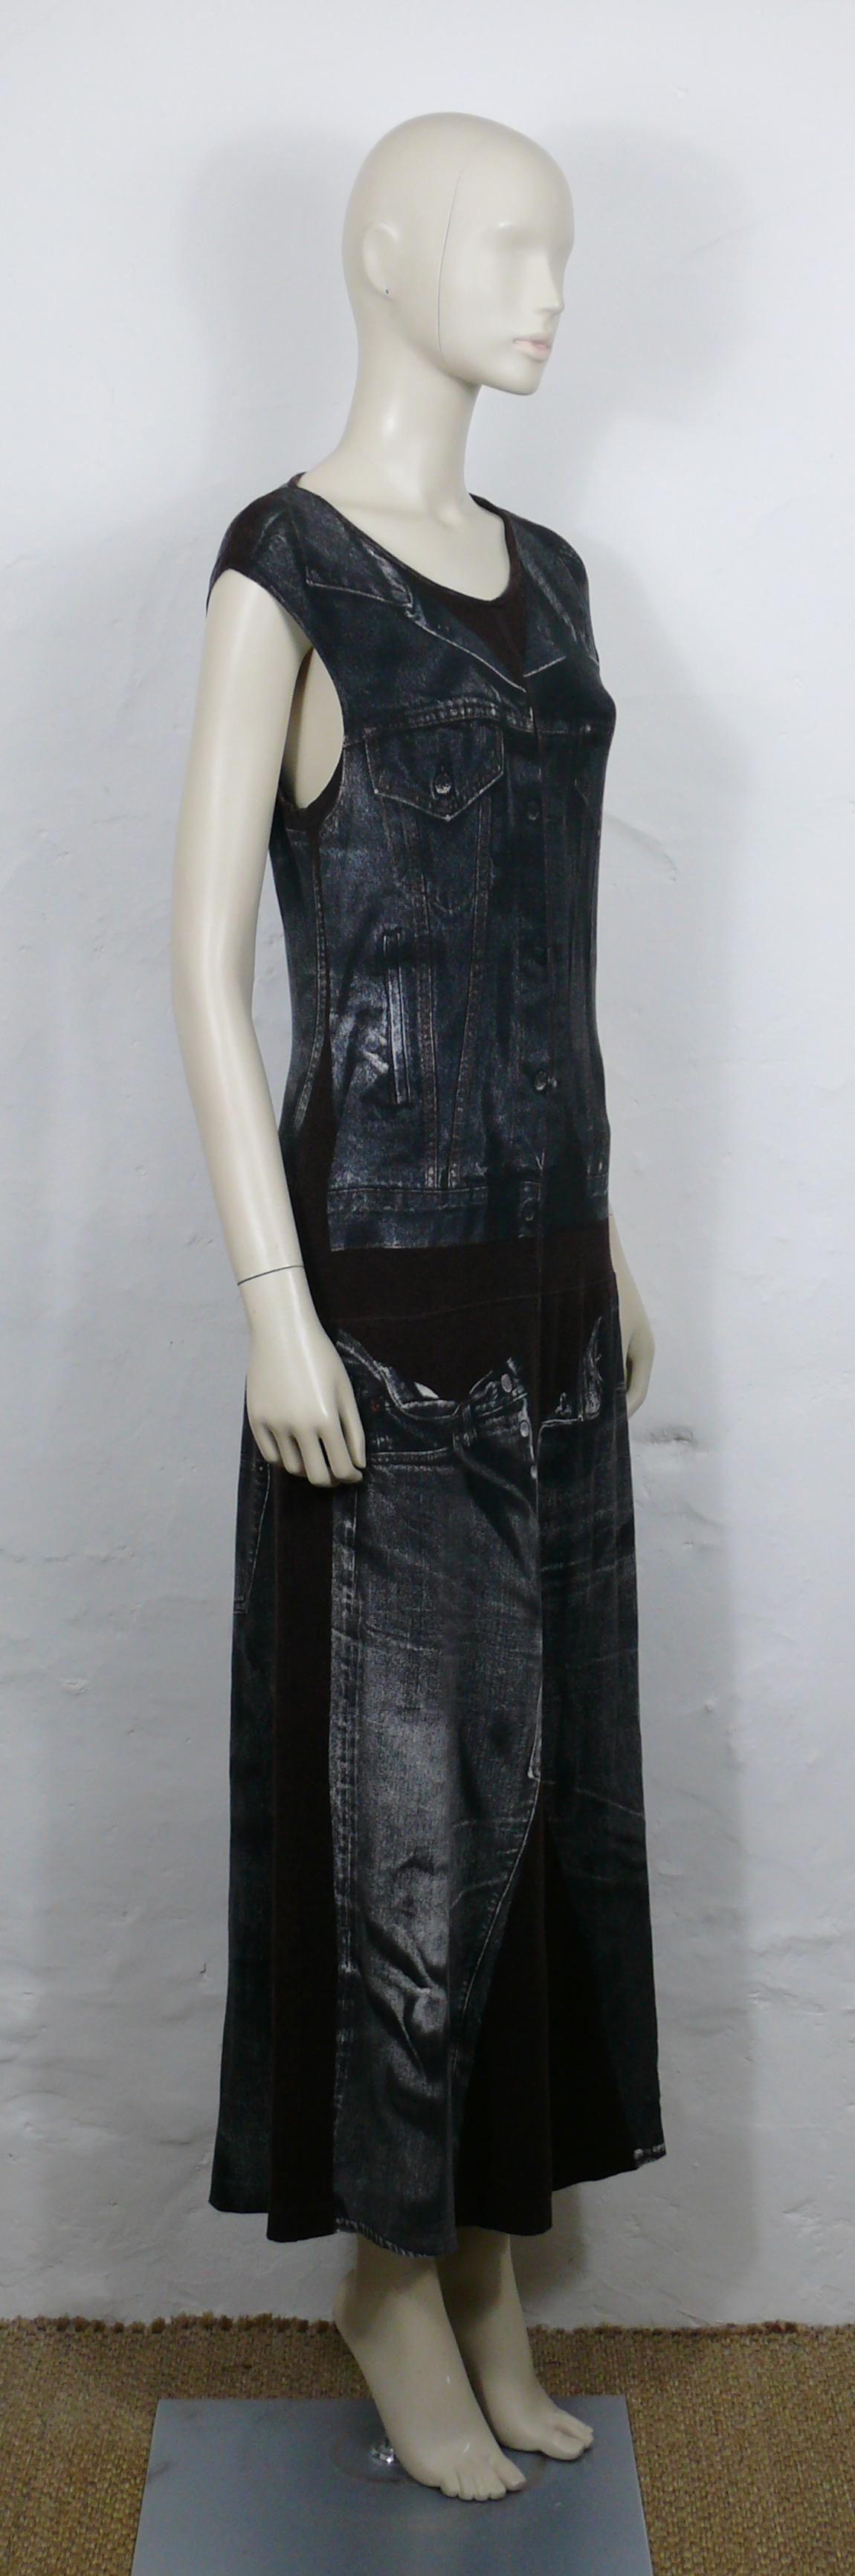 JEAN PAUL GAULTIER vintage sleevless maxi jersey dress featuring an x-ray screen trompe l’œil jean jacket and jeans on the front and back.

This dress features :
- Plum jersey background featuring distressed black/white x-ray screen trompe l’œil